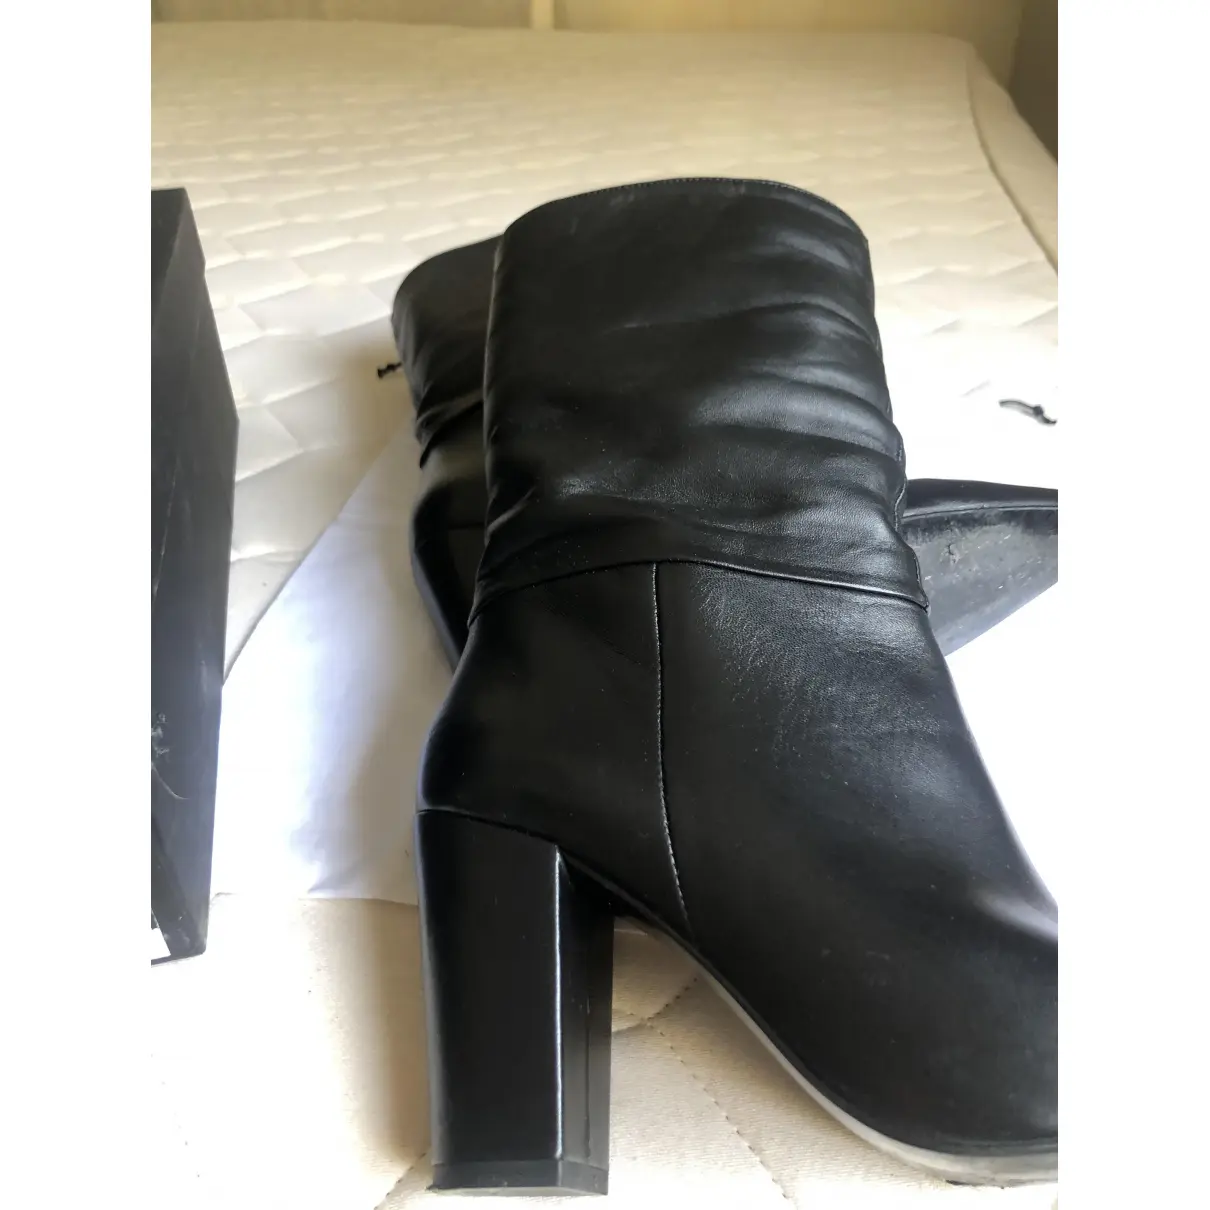 Leather boots Uterque